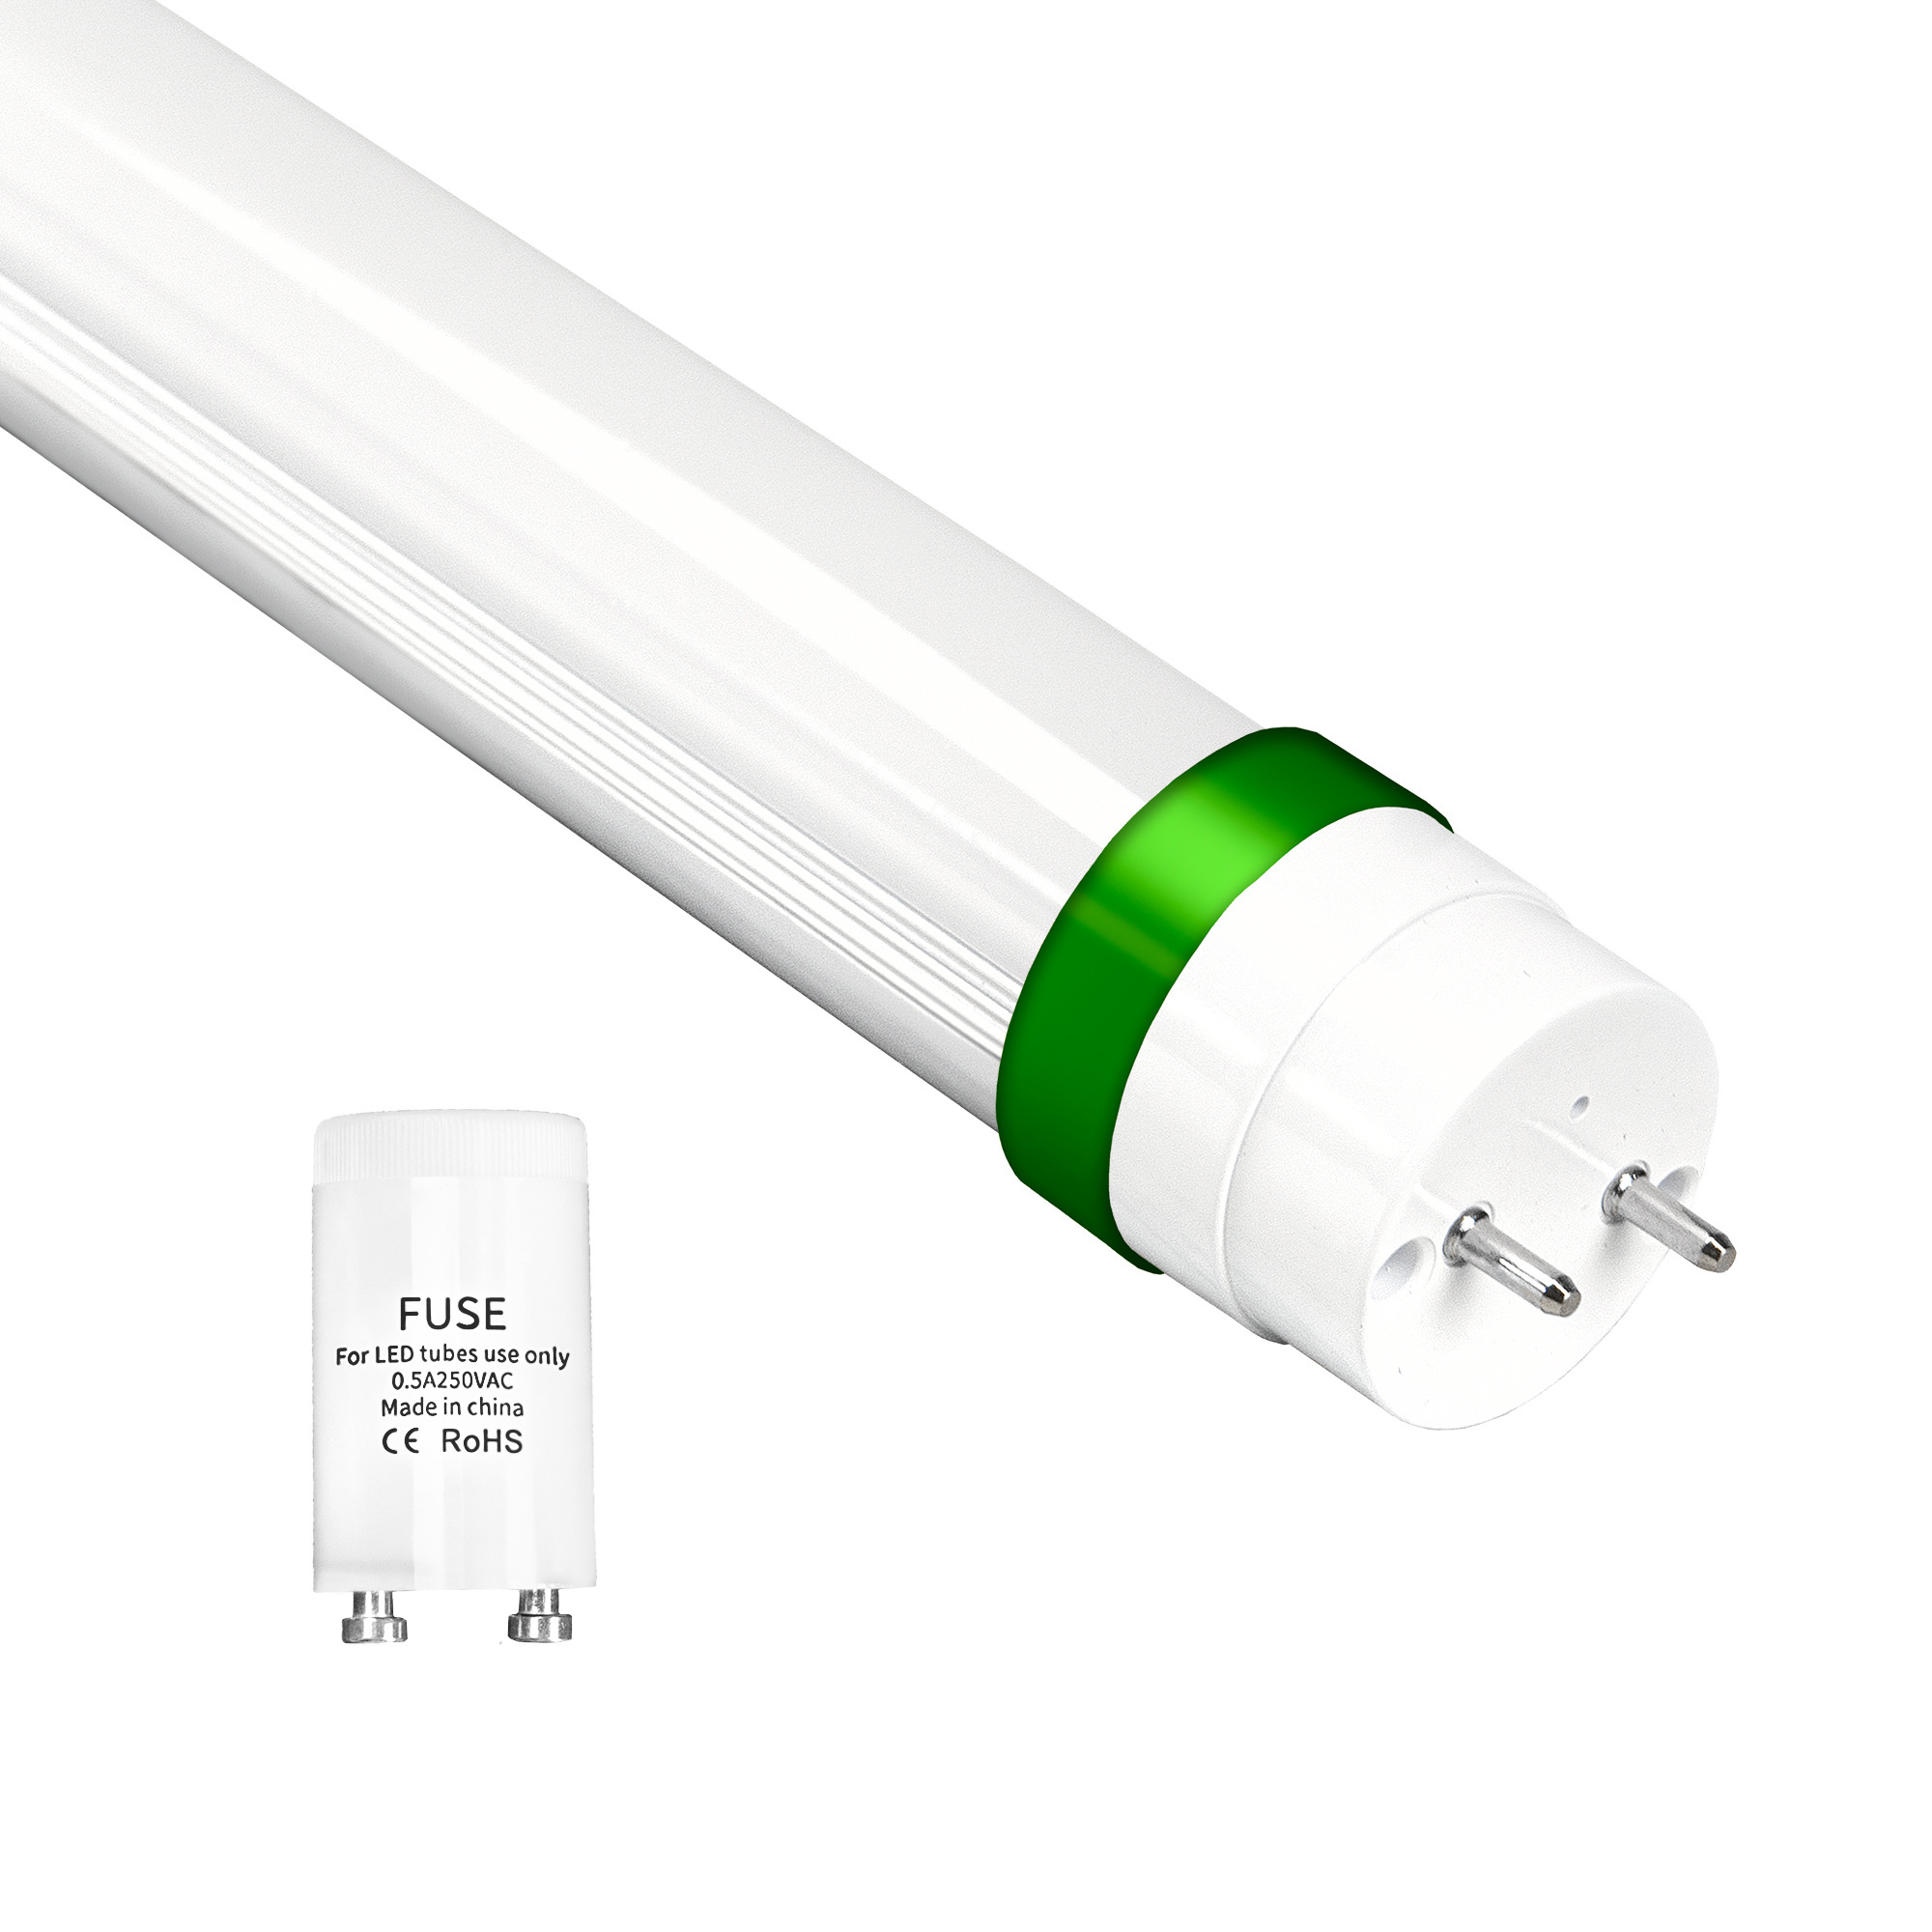 TUBE LED 1.50M DURALAMP L58840VB Remplacement tube fluo 58W